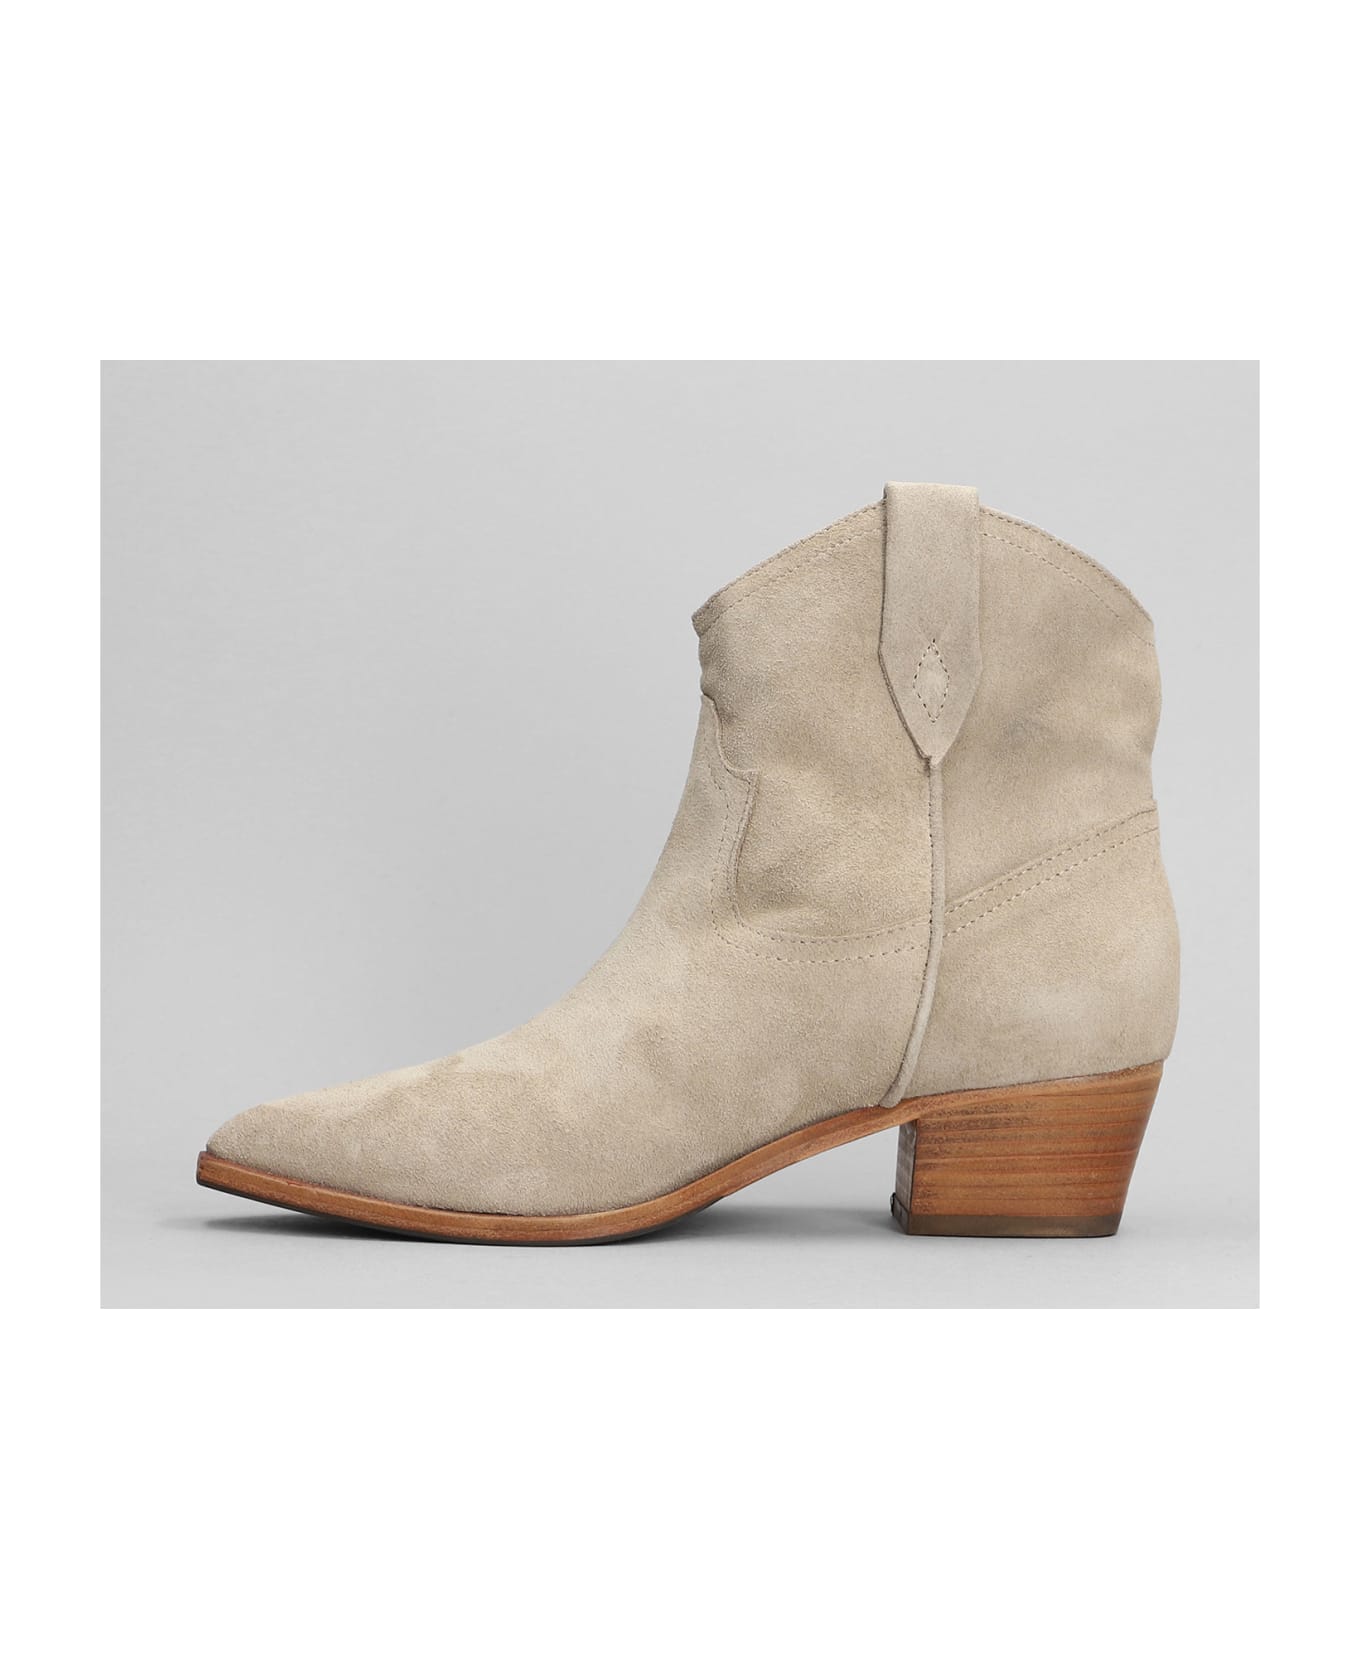 Julie Dee Texan Ankle Boots In collaboration Suede - collaboration